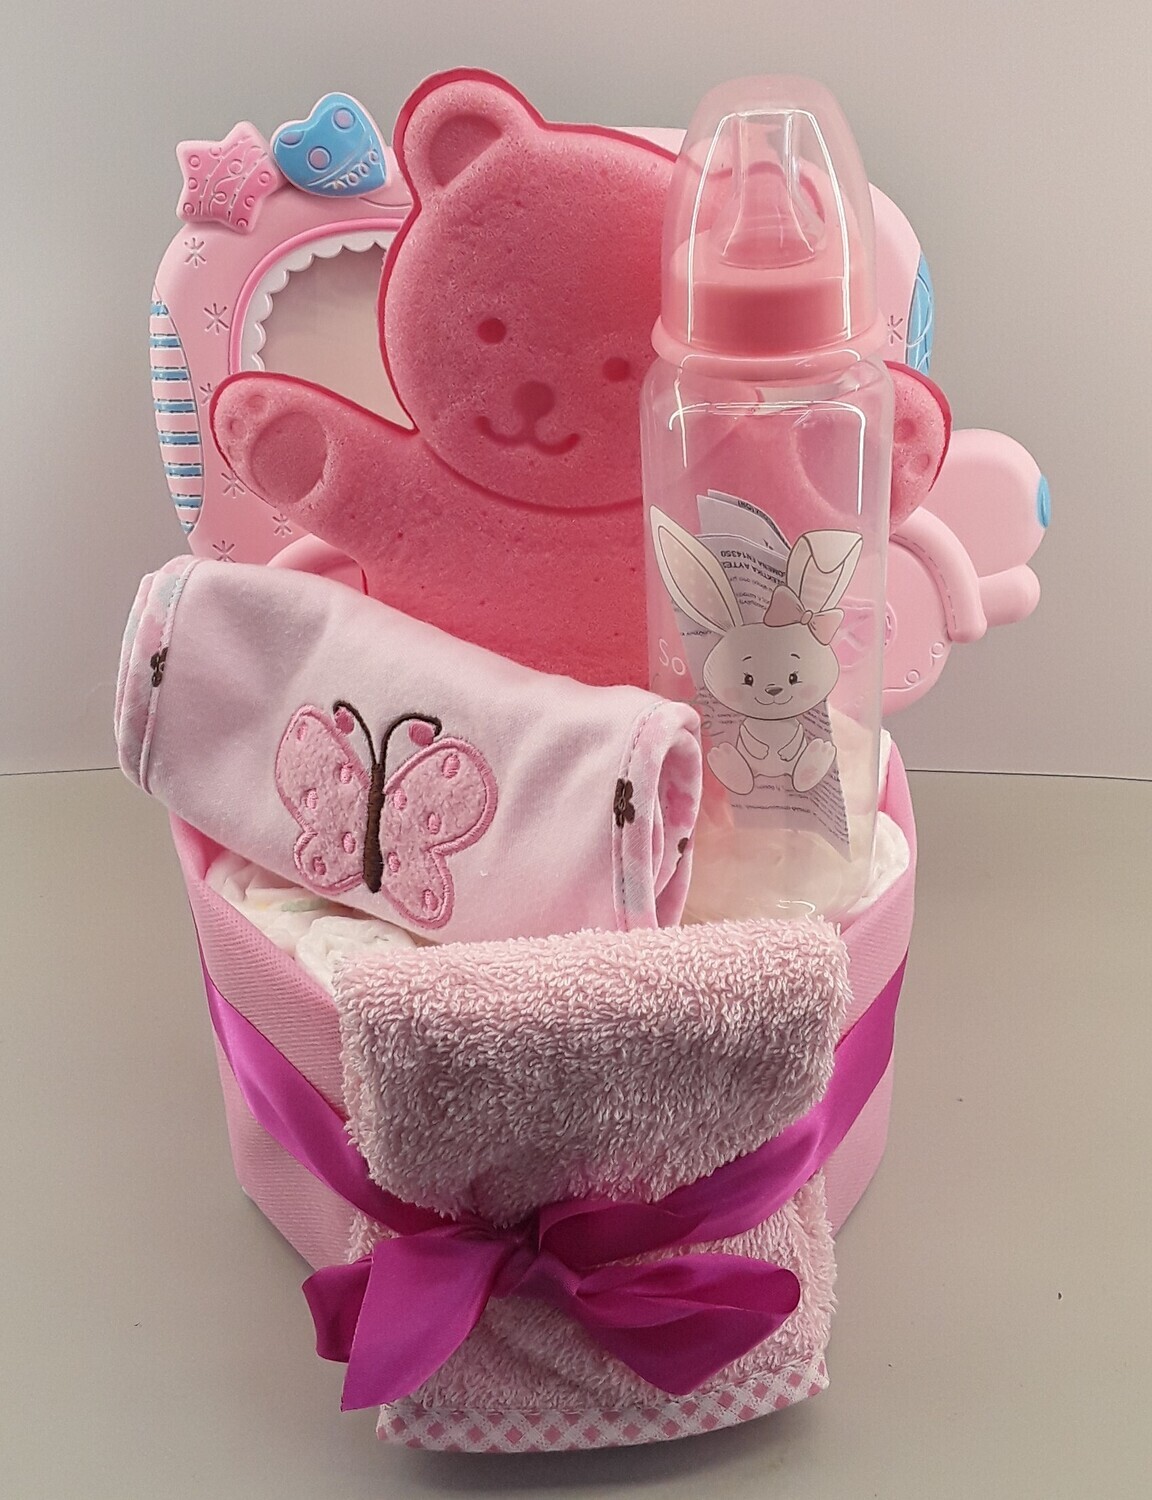 Creation for baby new born girl!!!